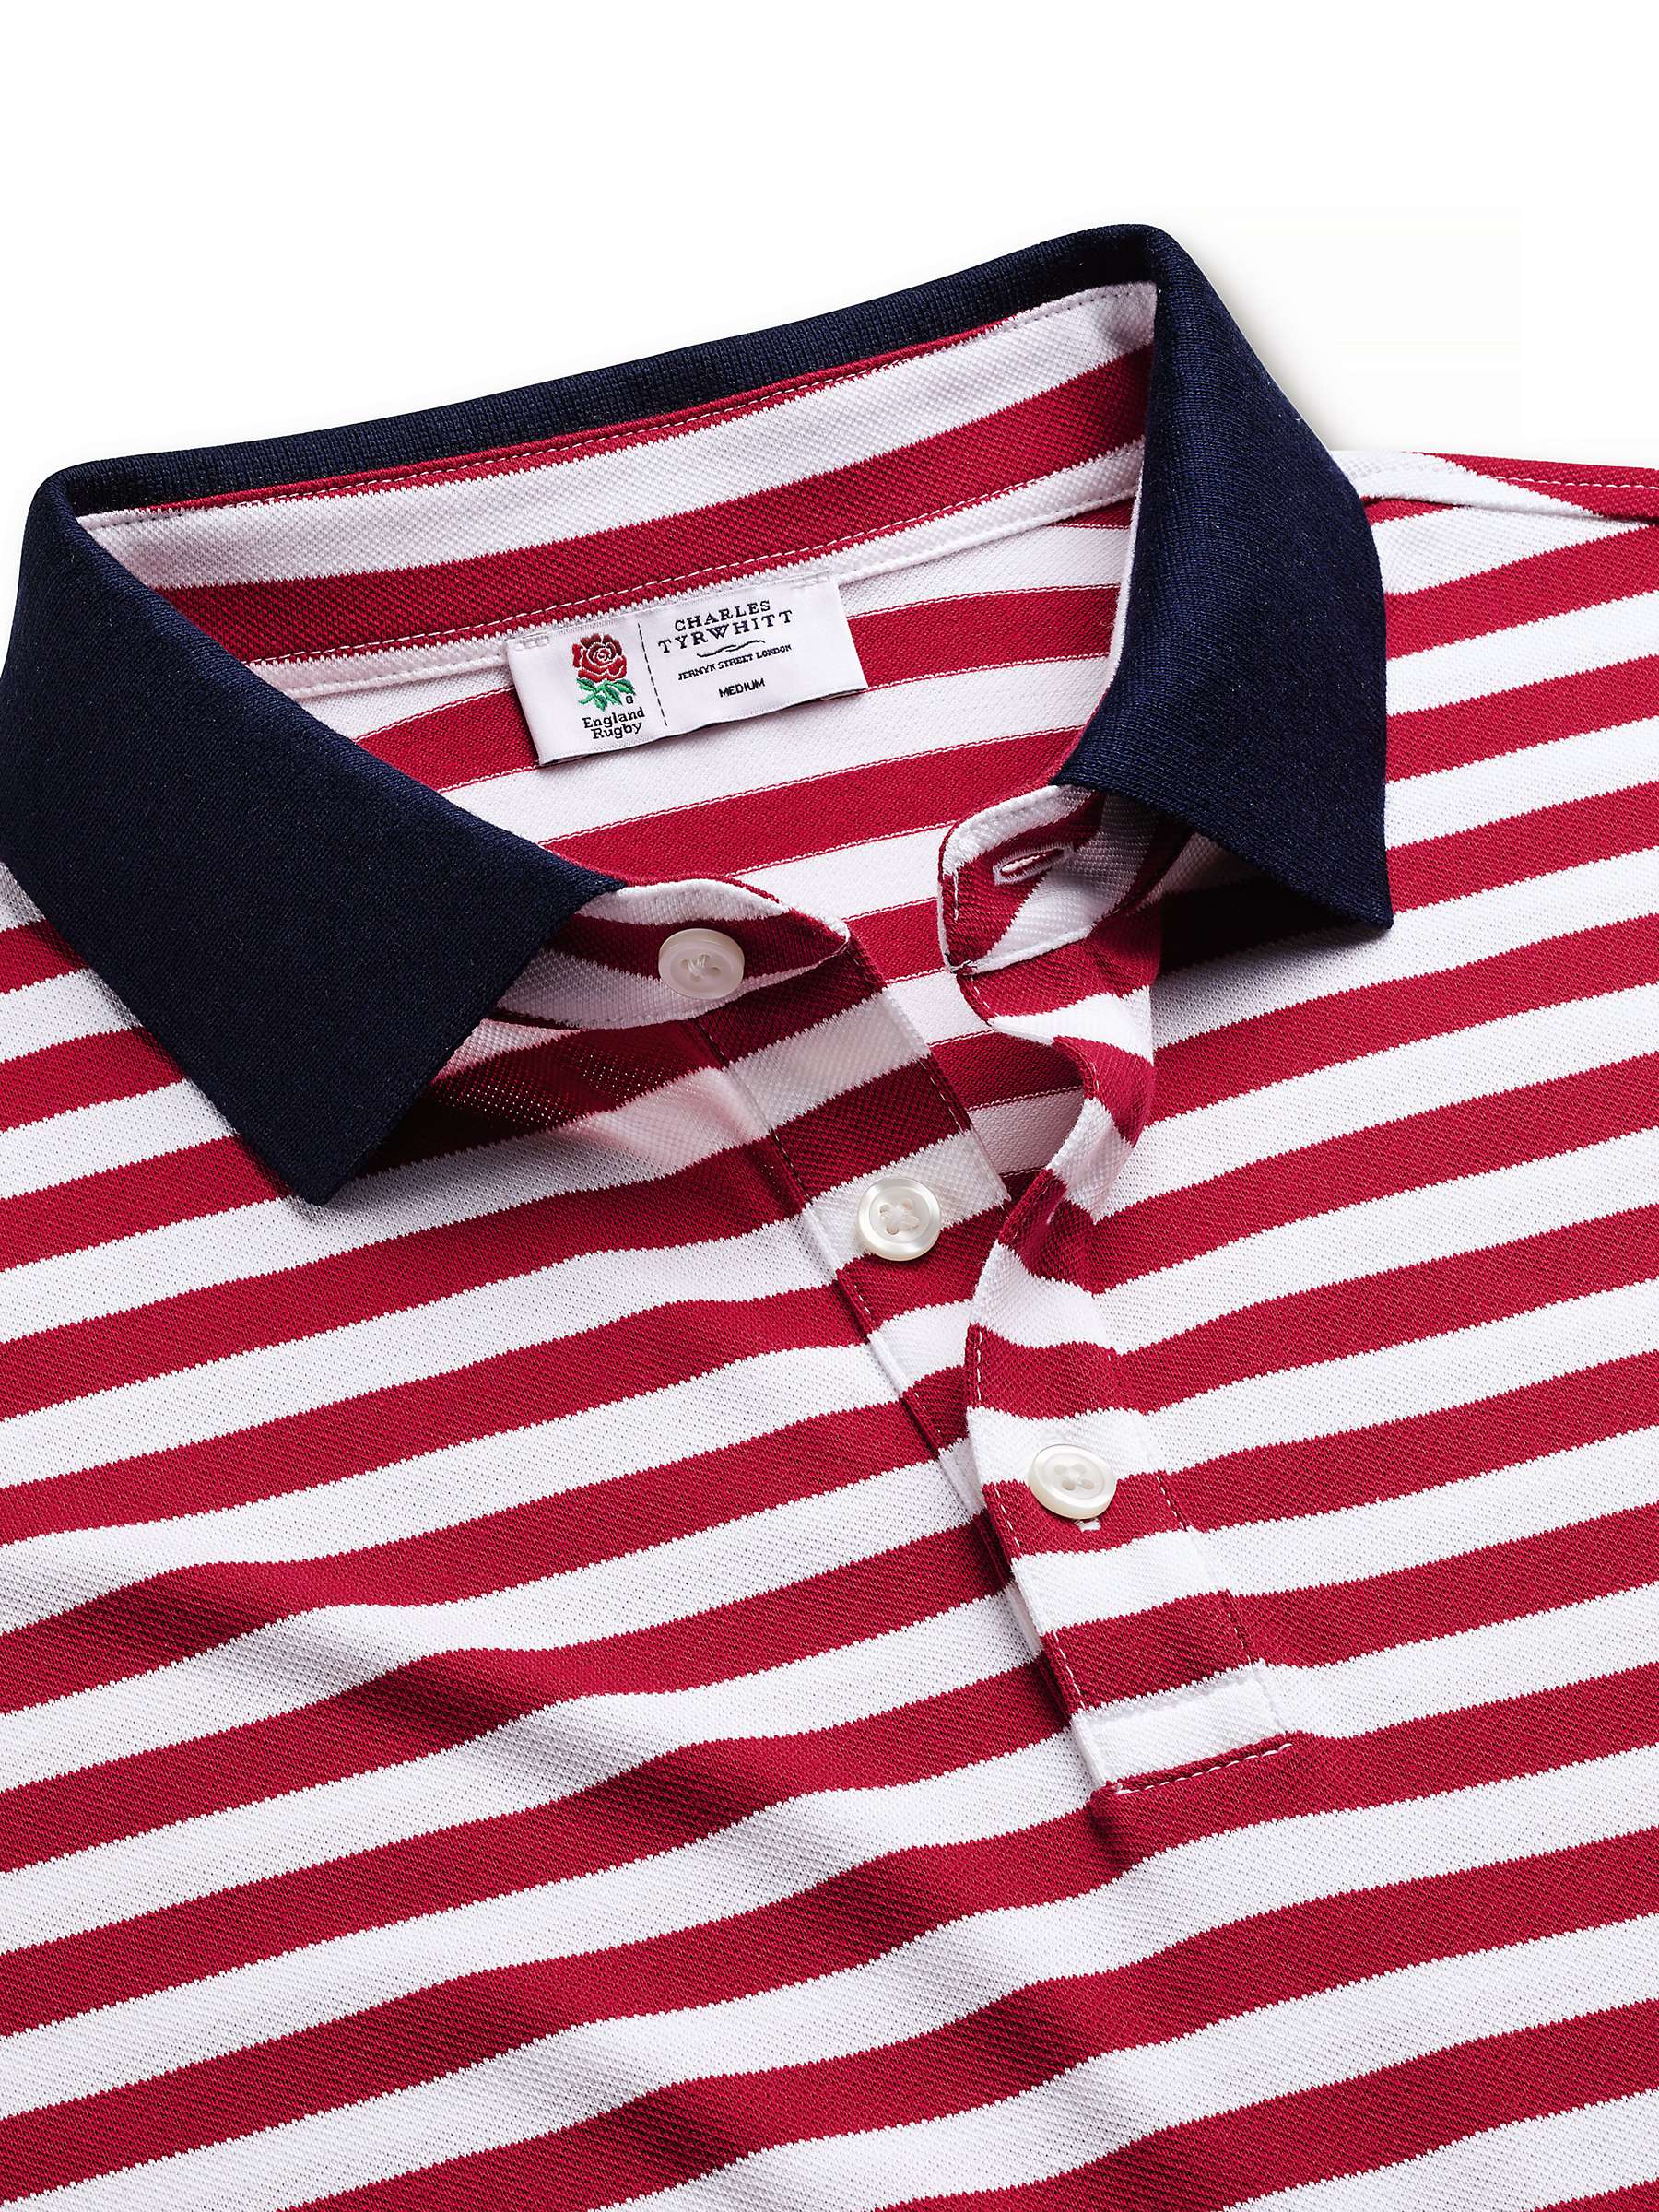 Buy Charles Tyrwhitt England Rugby Stripe Pique Polo Shirt Online at johnlewis.com